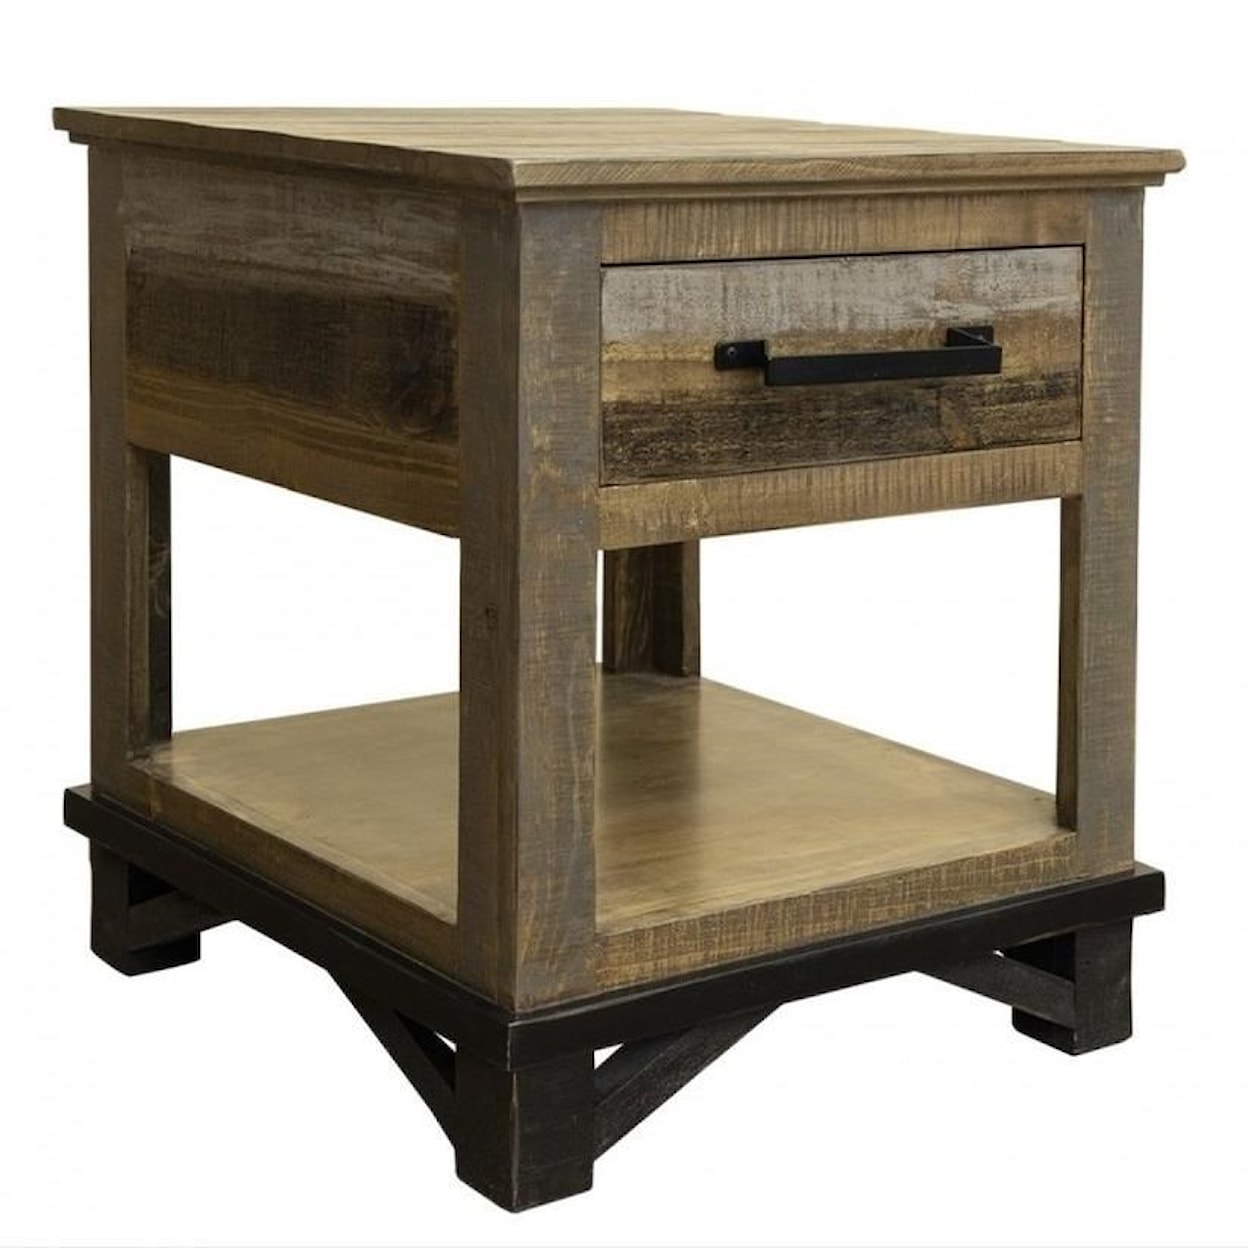 International Furniture Direct Loft End Table with 1 Drawer